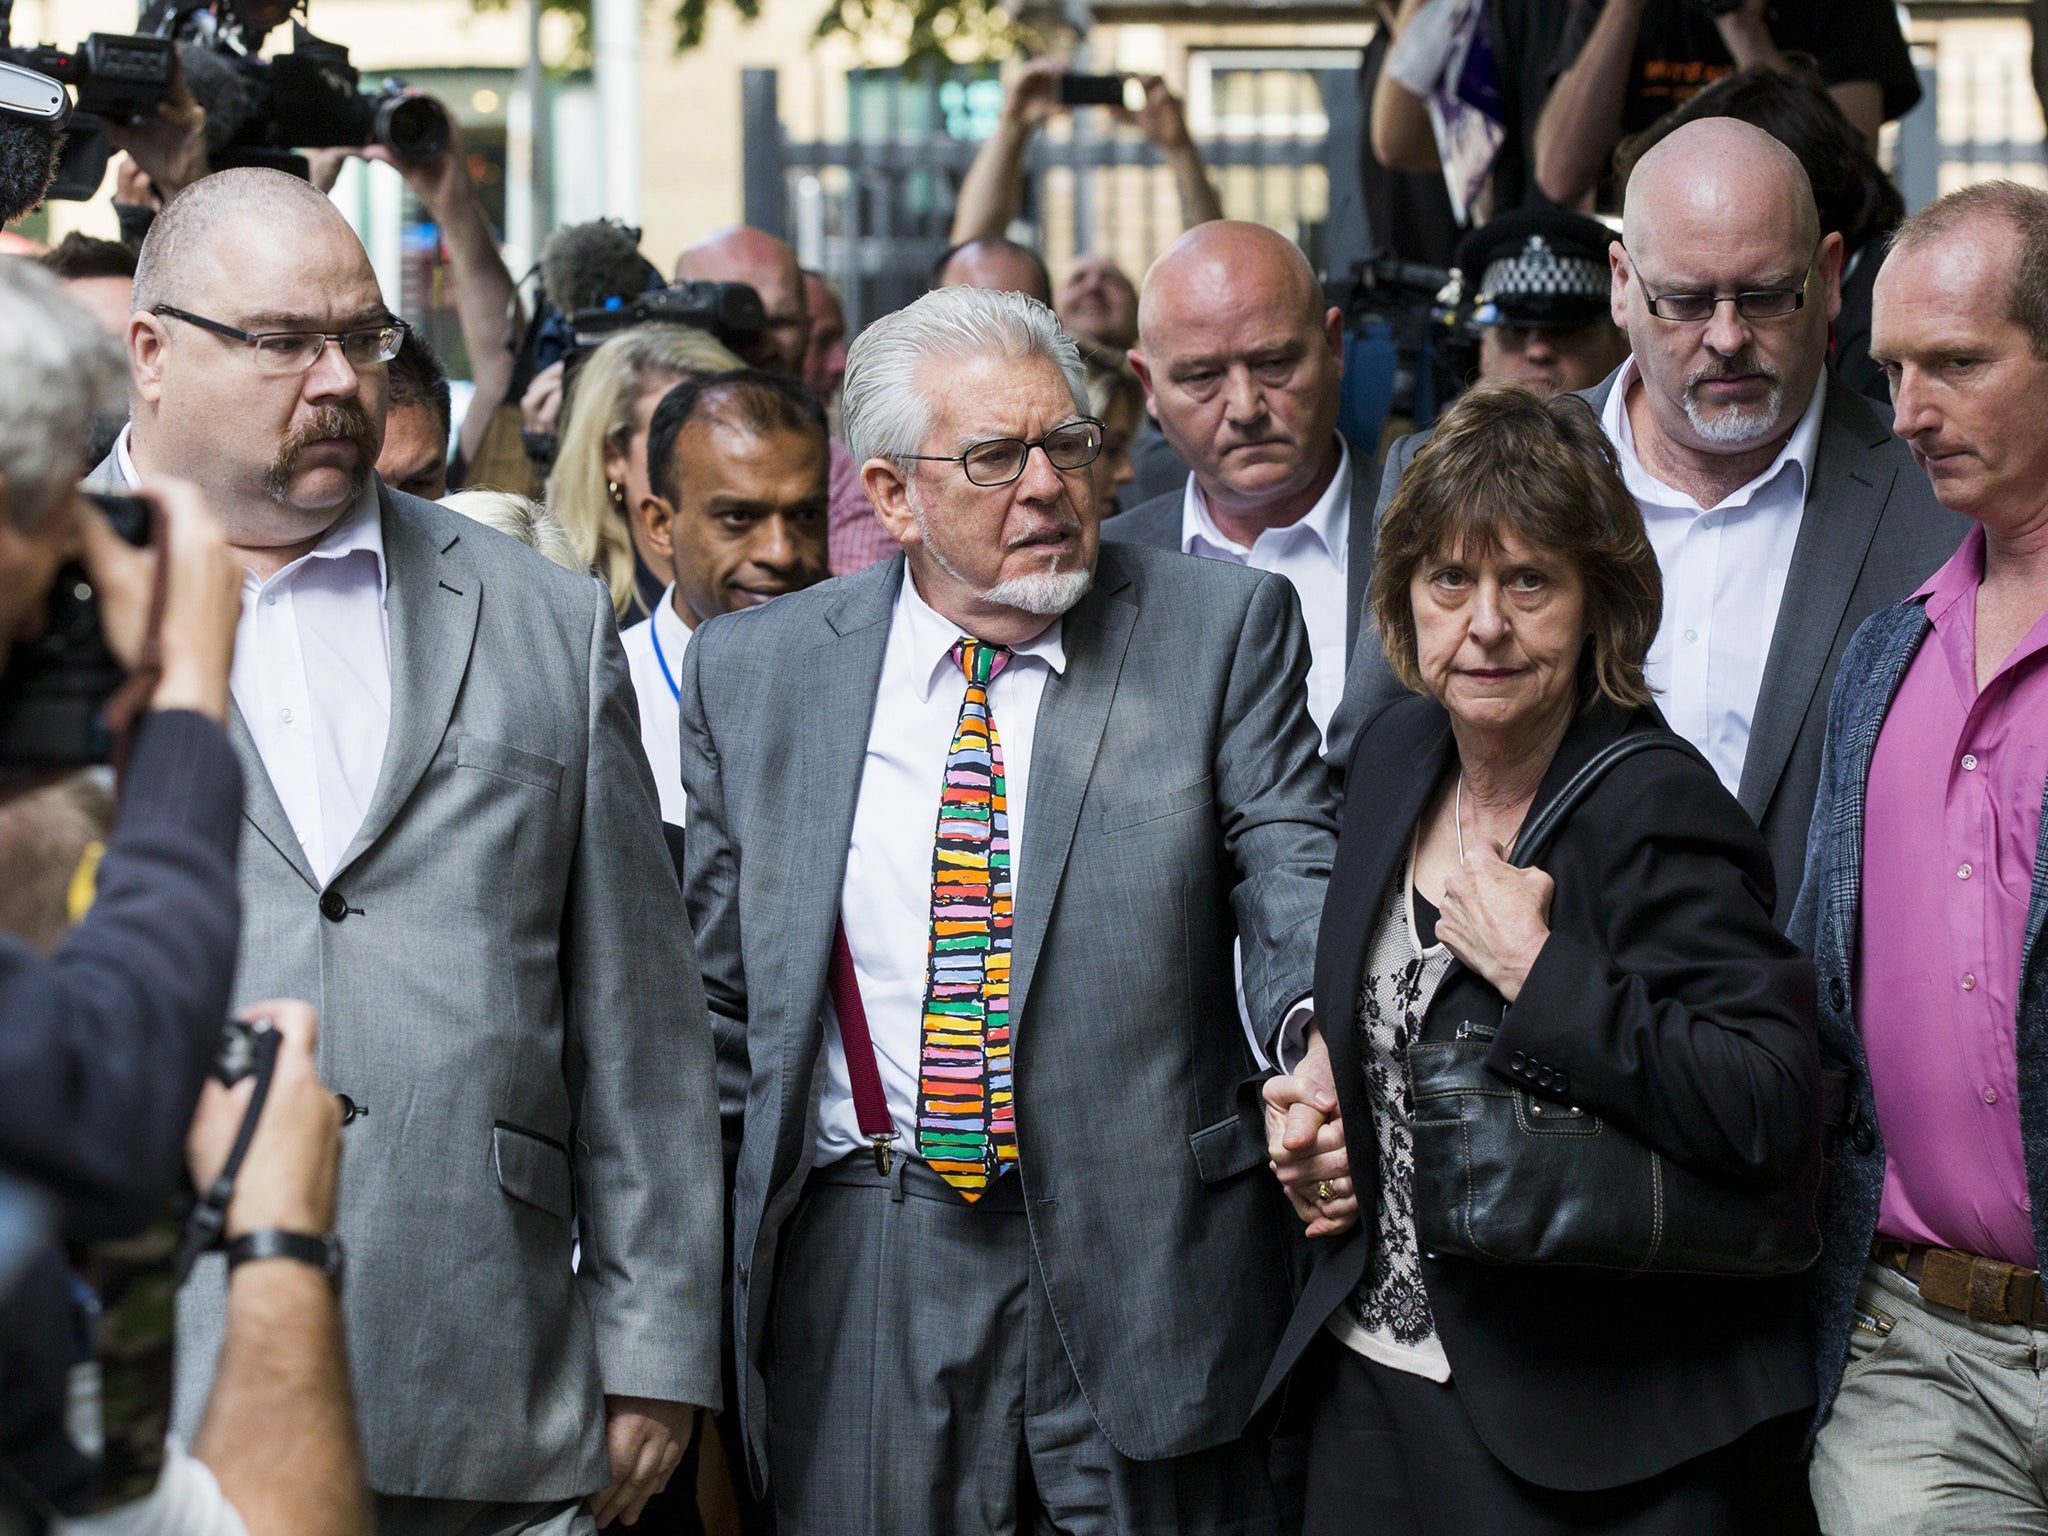 Rolf Harris arrives at Southwark Crown Court to face sentencing on 12 counts of indecent assault in London